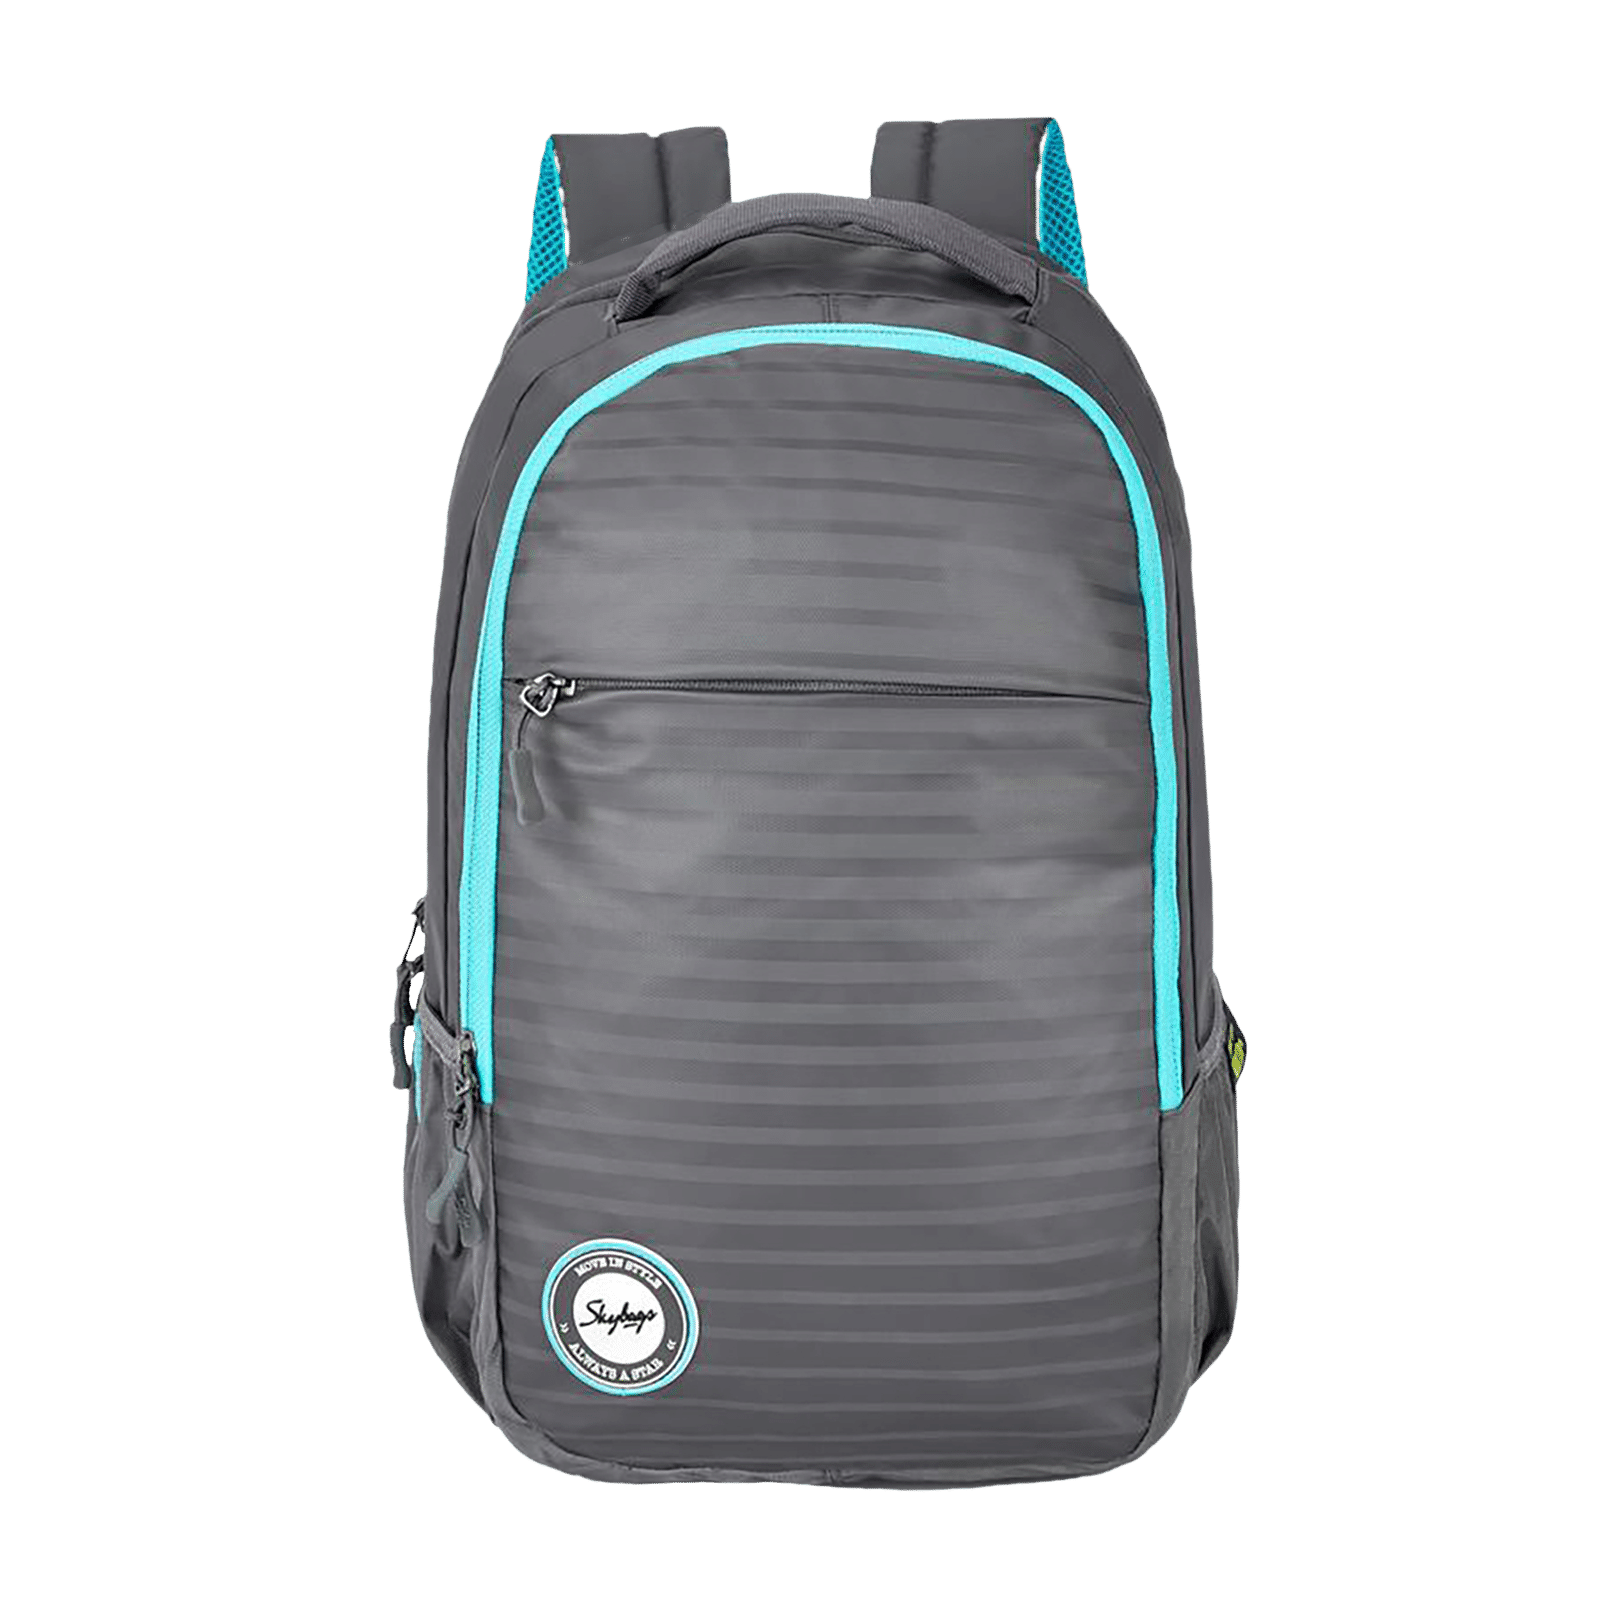 SKYBAGS CAMPUS PLUS XL 01 LAPTOP BACKPACK GREY  Skybags